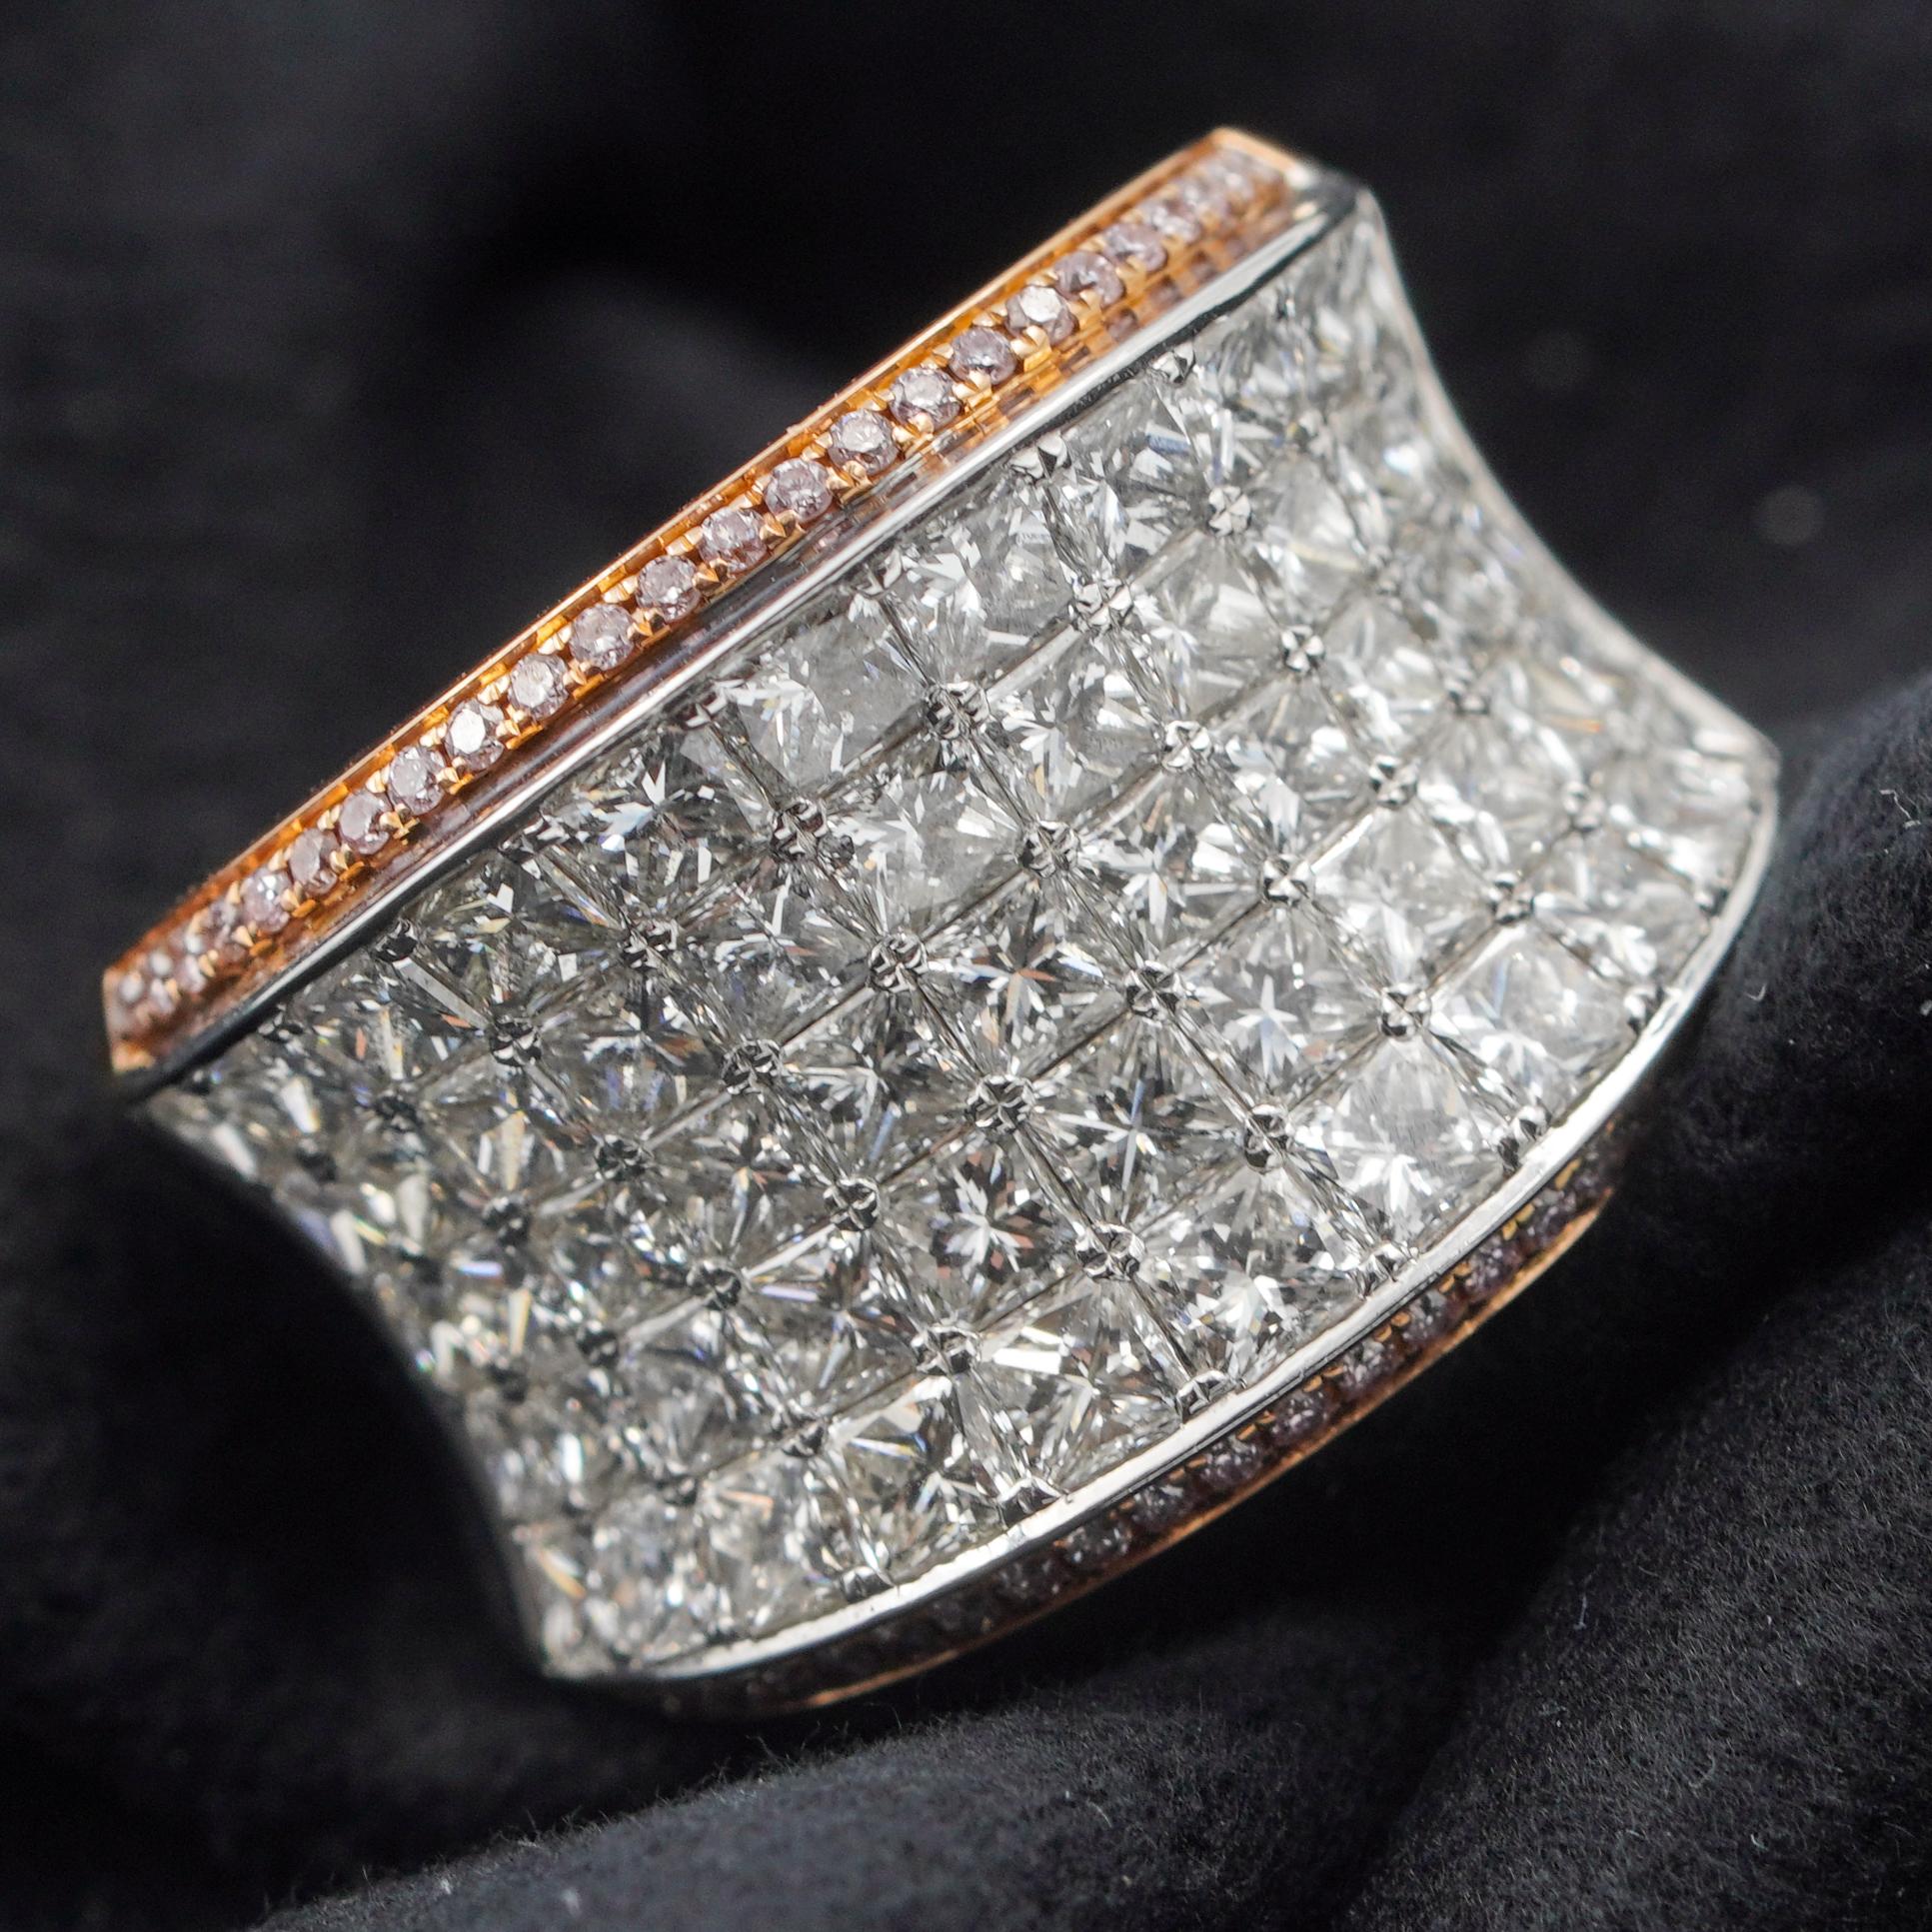 This brilliant two-tone diamond ring plays with the light and is sure to stand out on your finger. The piece is covered in Pave Diamonds totaling 4.17 Carats. The central pave is framed by small pink diamonds set in the rose gold on either side of